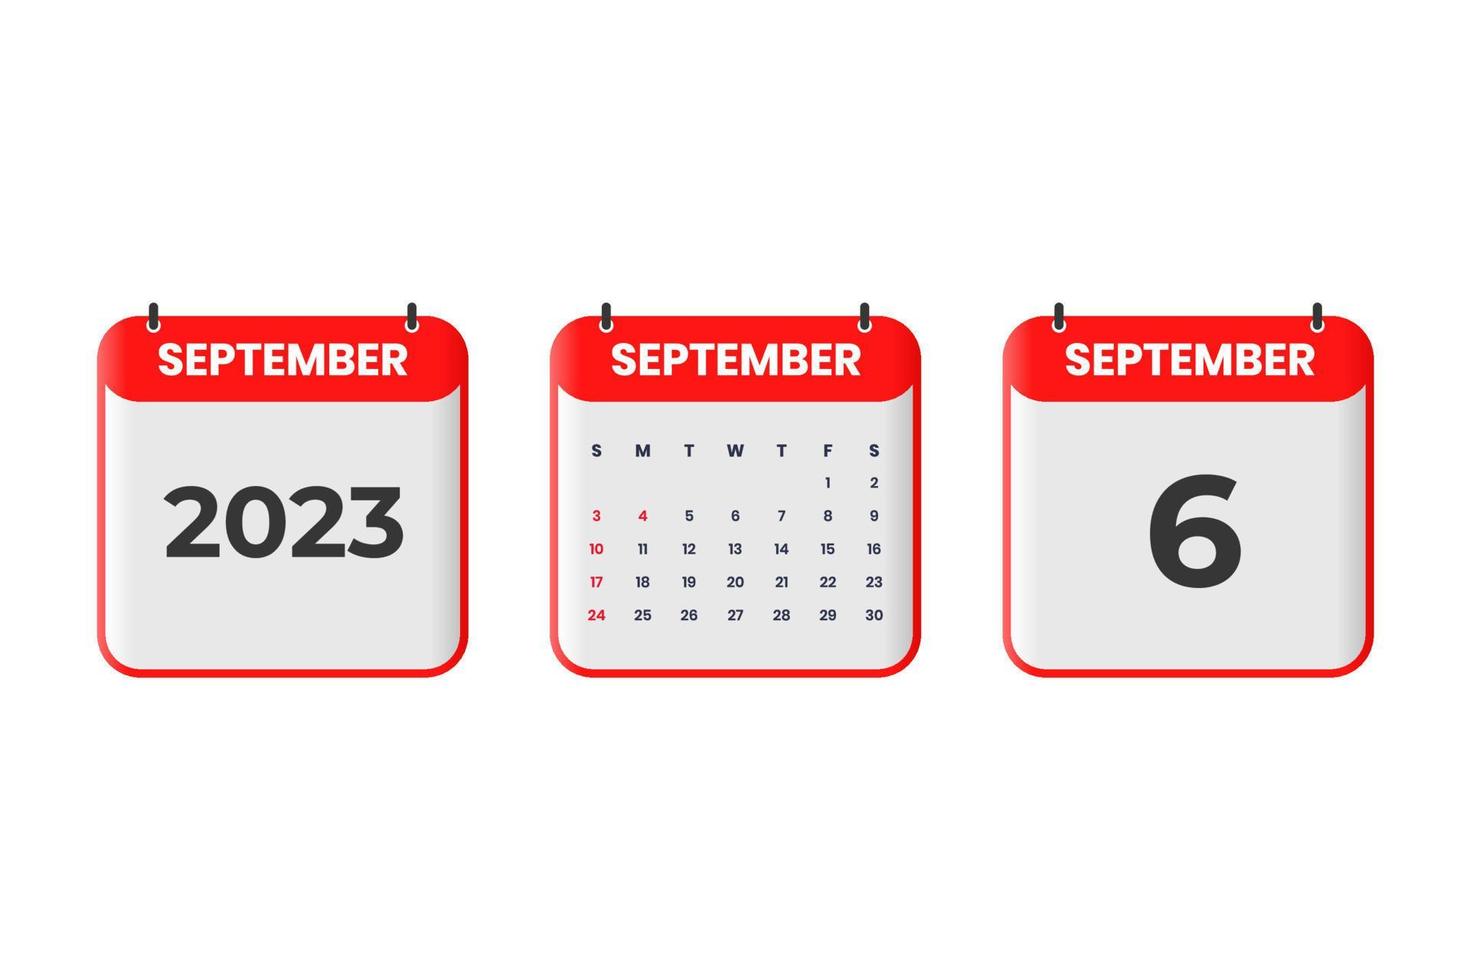 September 2023 calendar design. 6th September 2023 calendar icon for schedule, appointment, important date concept vector